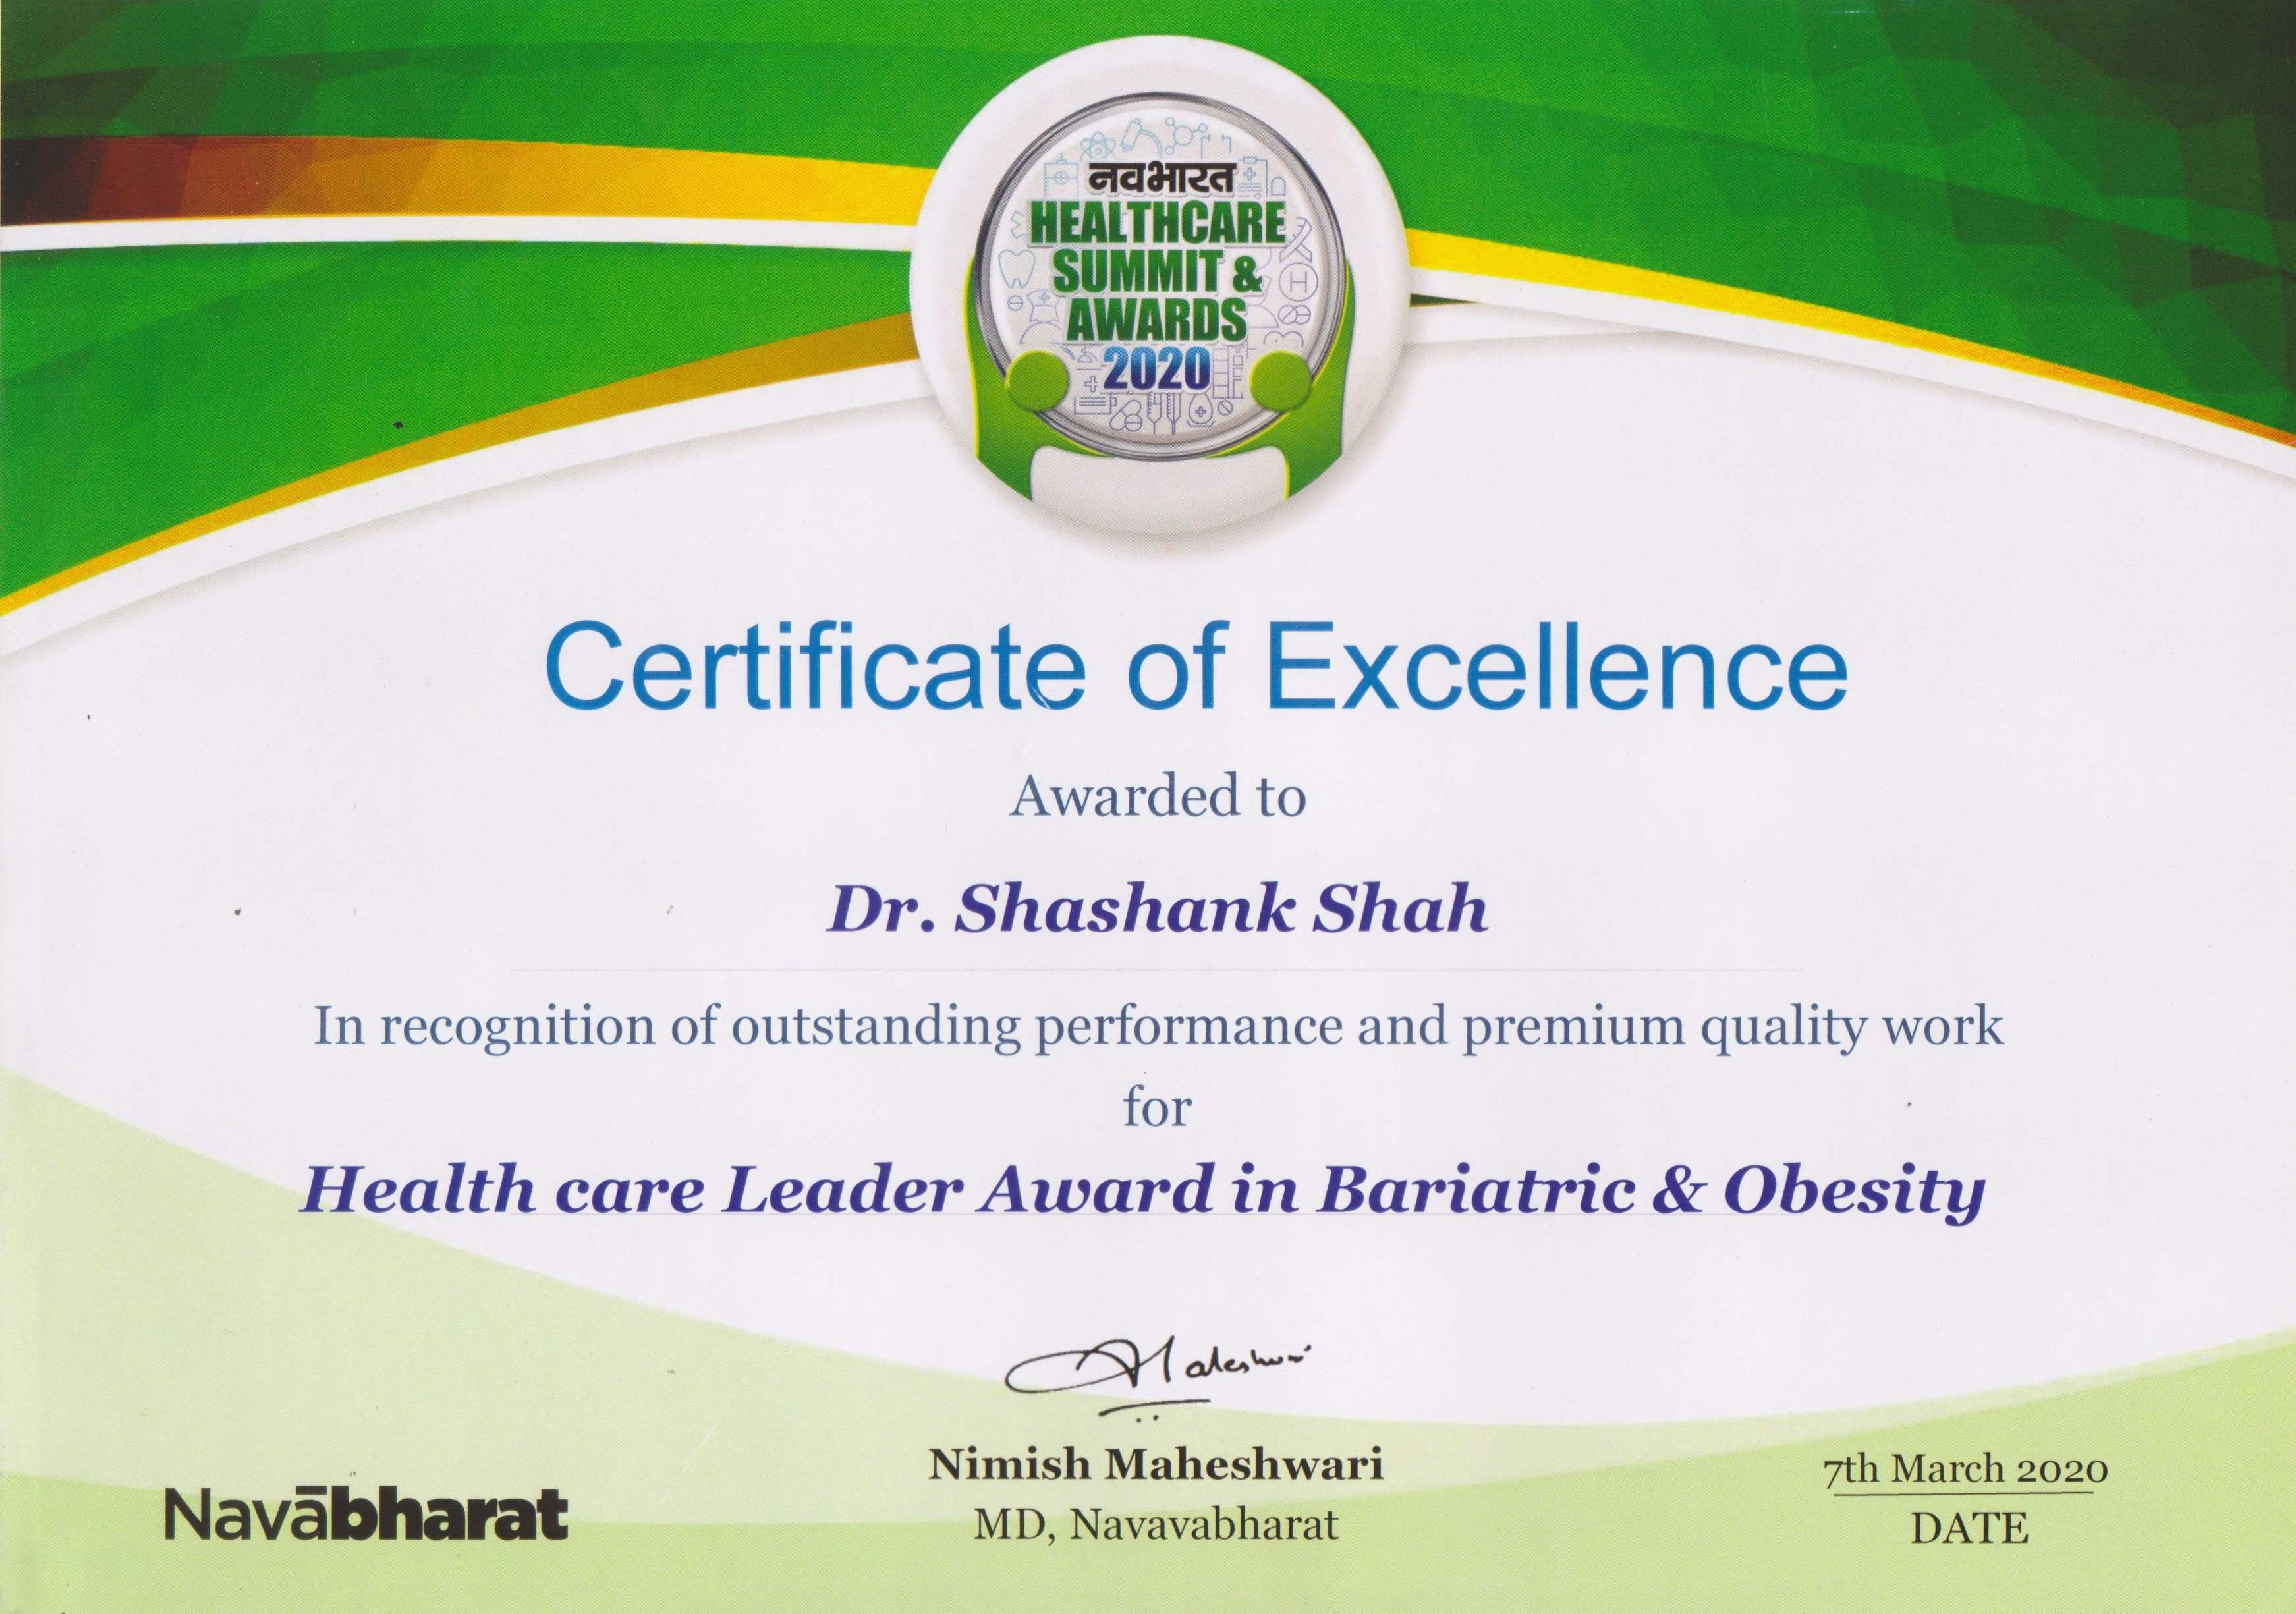 Dr Shashank Shah was awarded the Certificate of Excellence for his outstanding contribution and premium quality work for the Healthcare Leader in Bariatric and Obesity by the Nav Bharat Times Healthcare Summit Awards in 2020.